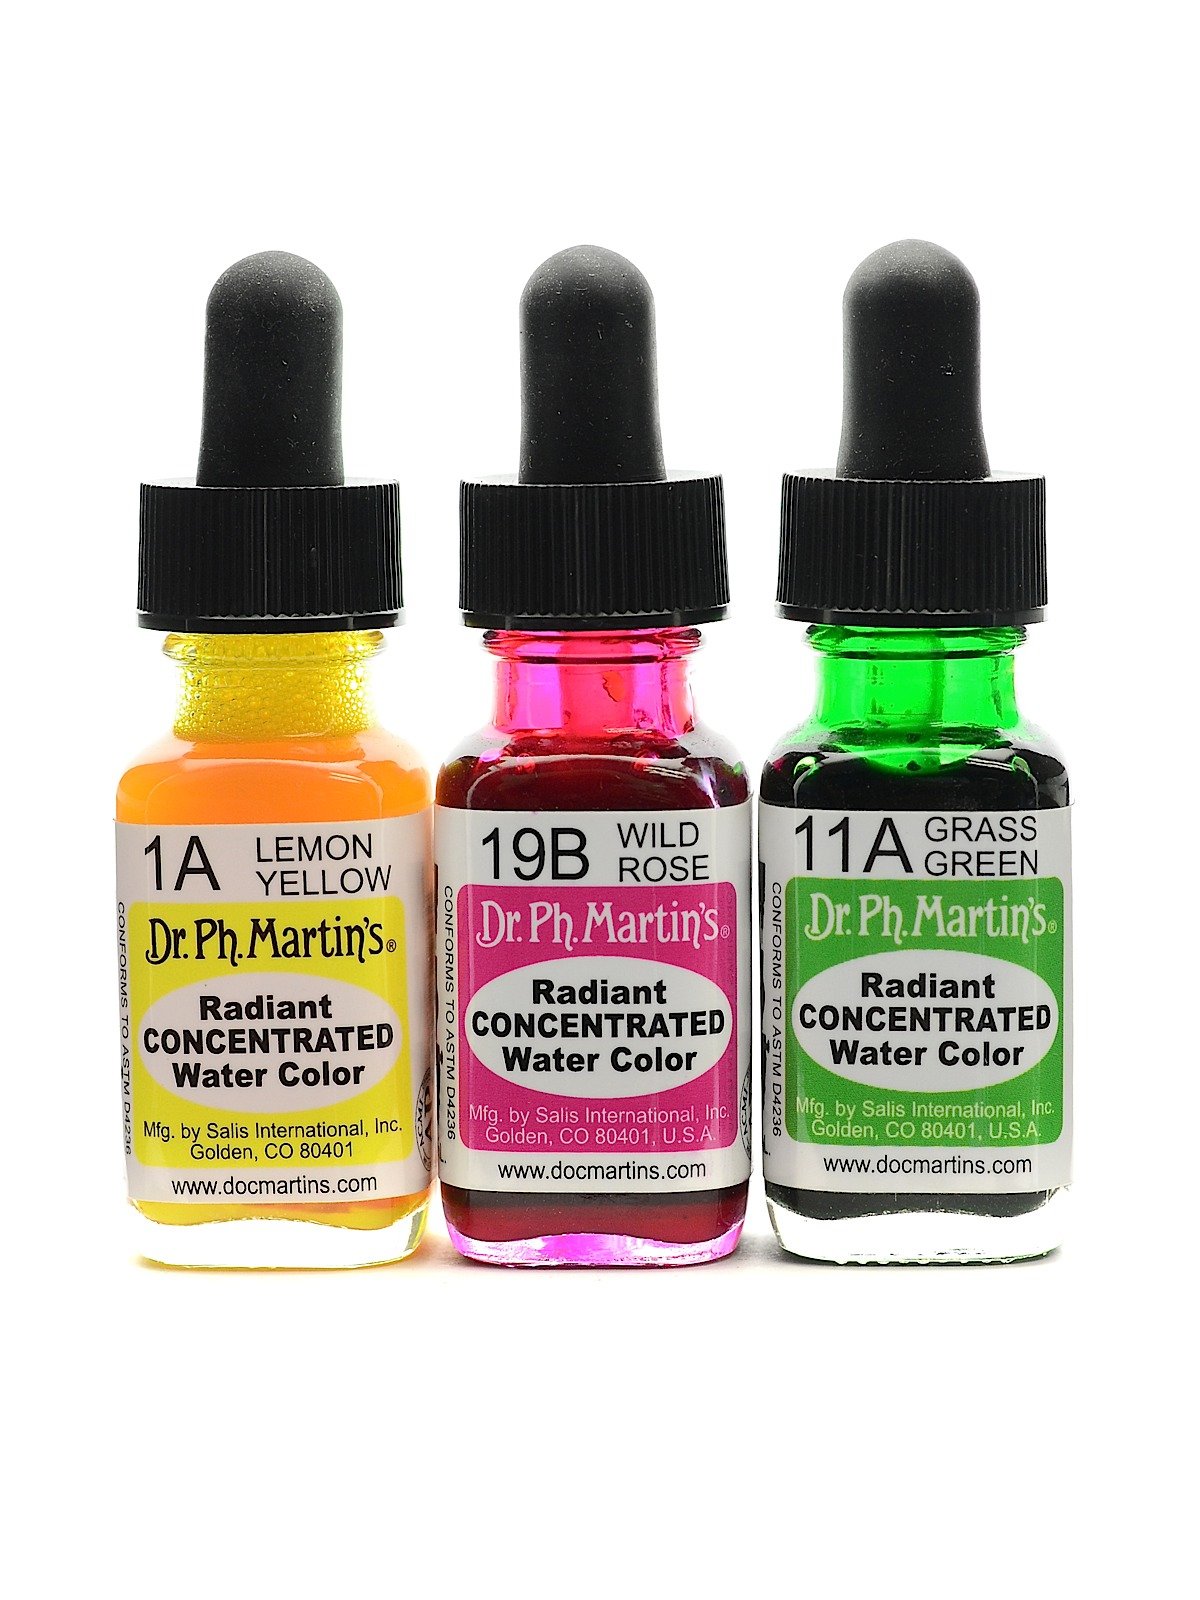 Dr. Ph. Martin's - Radiant Concentrated Watercolors